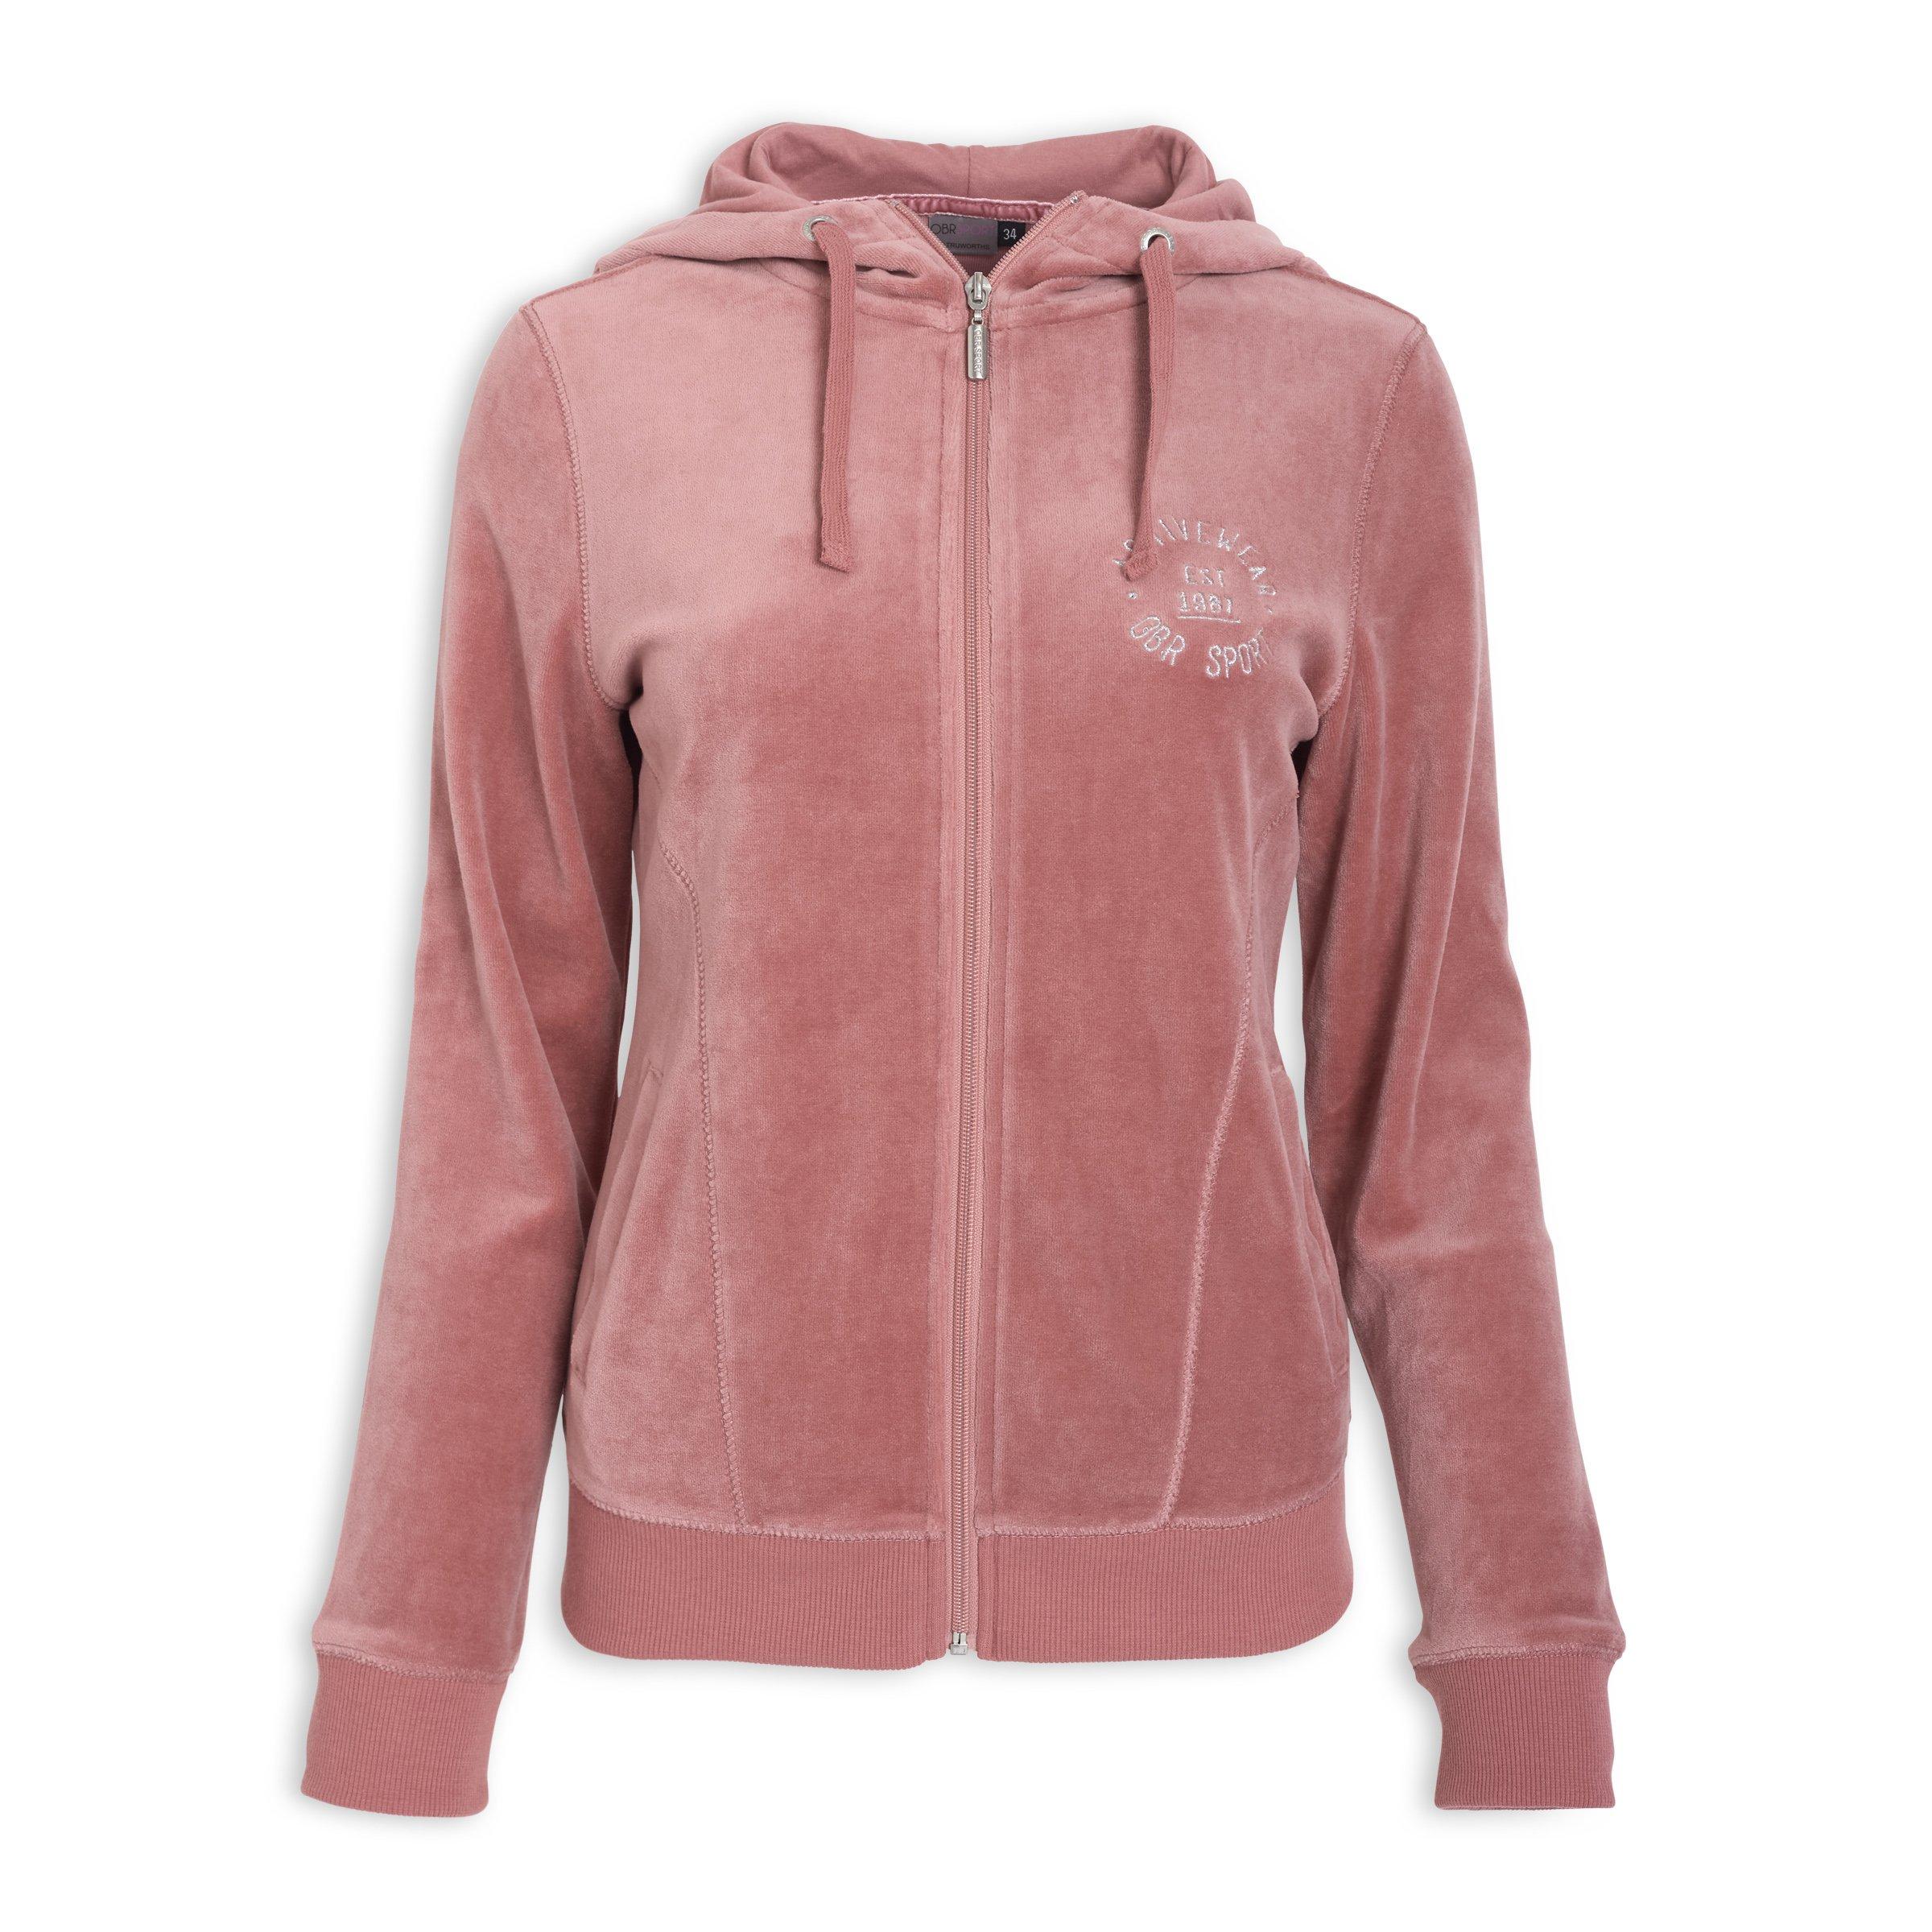 Truworths Tracksuits For Ladies ...